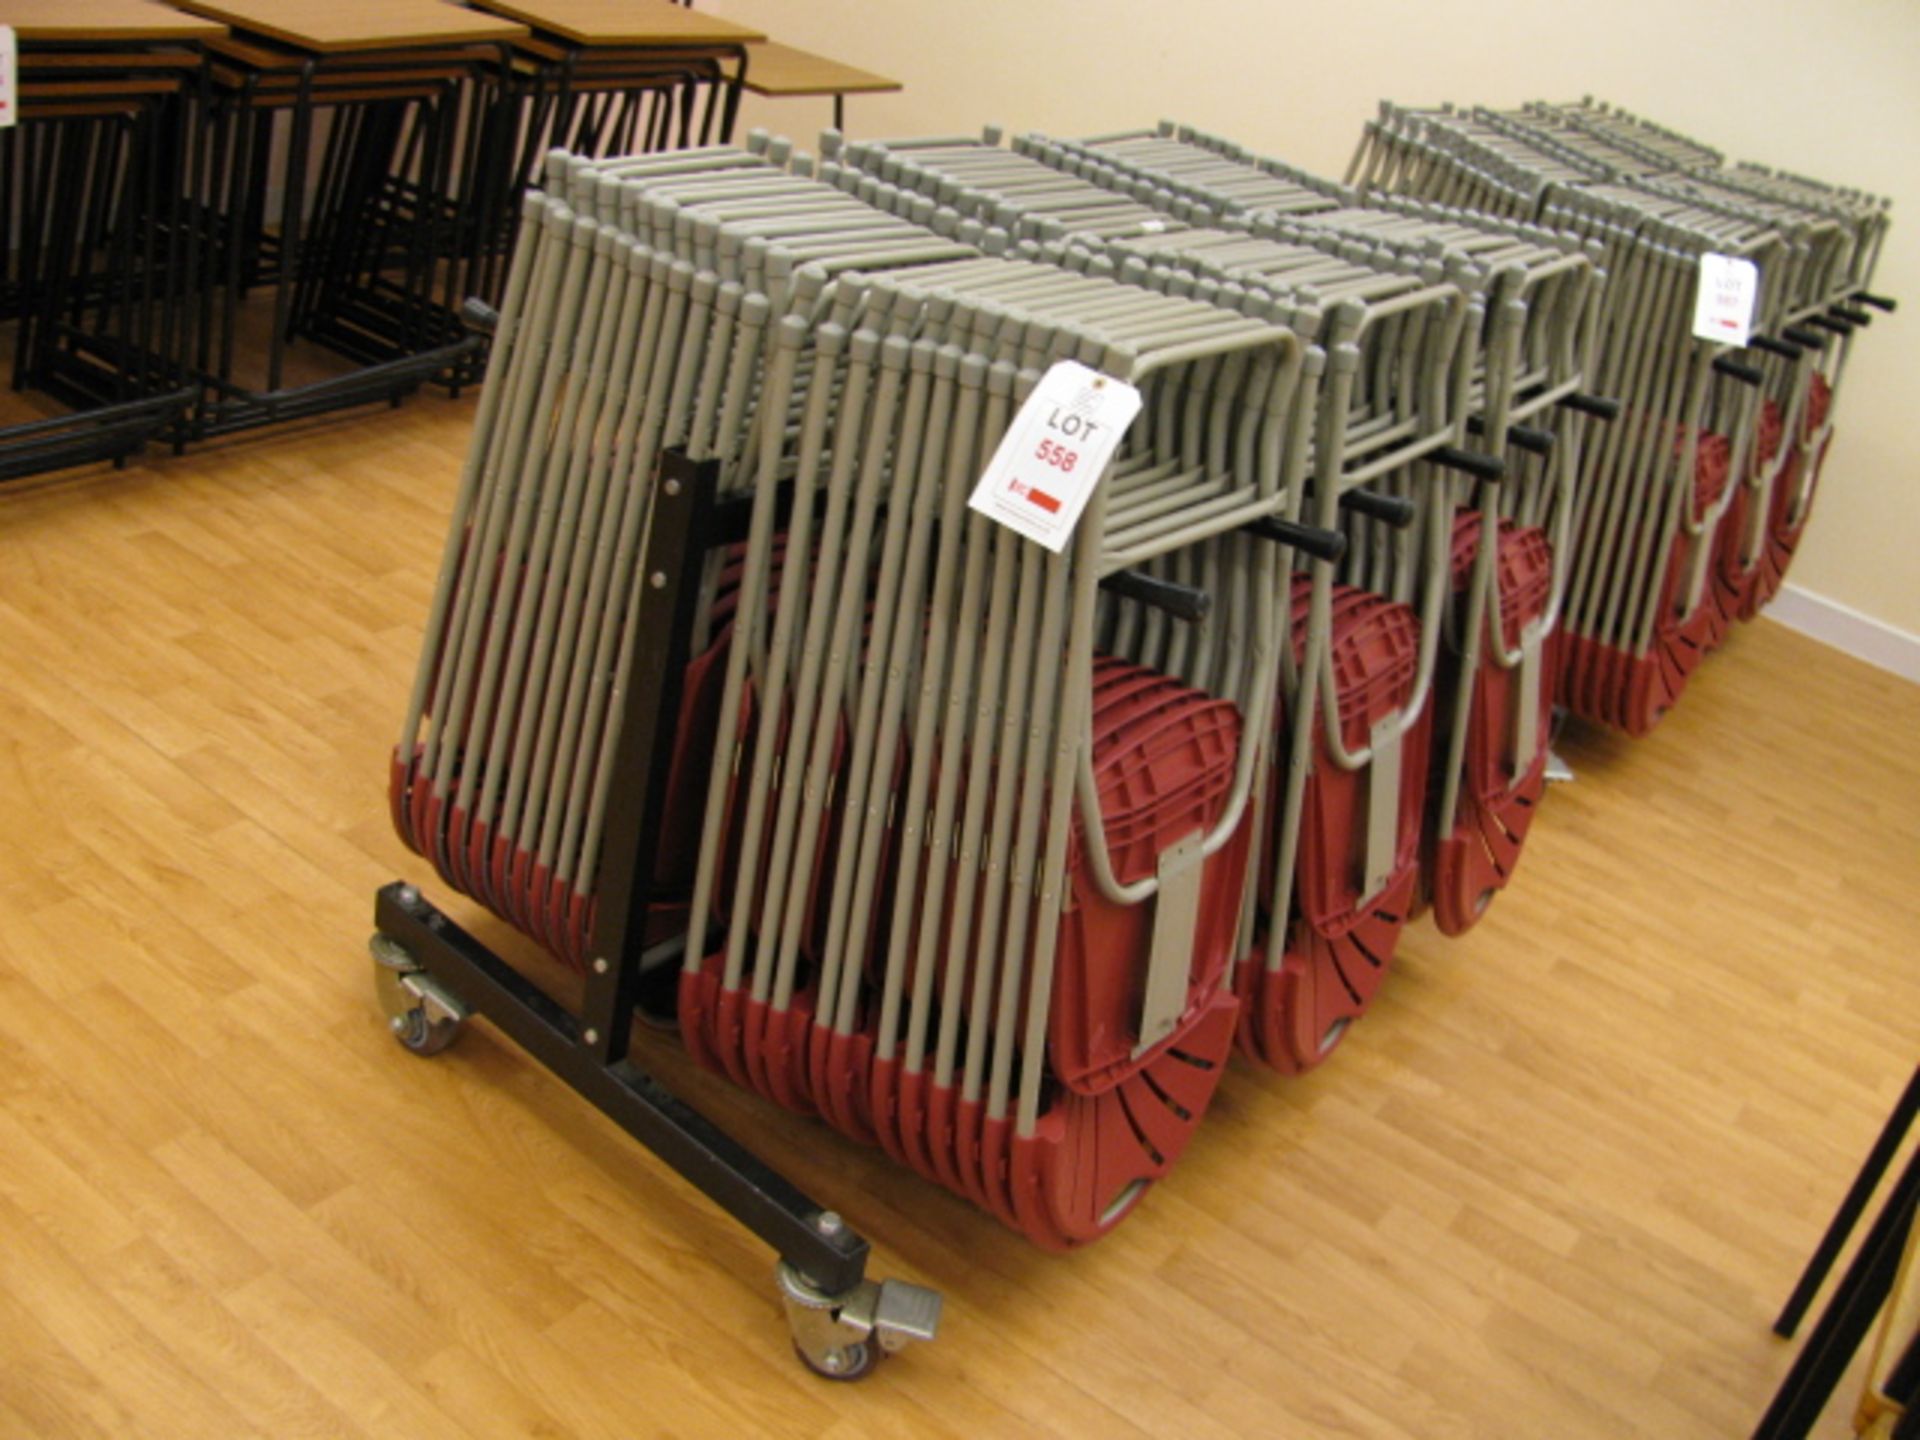 Seventy two folding plastic chairs on mobile rack